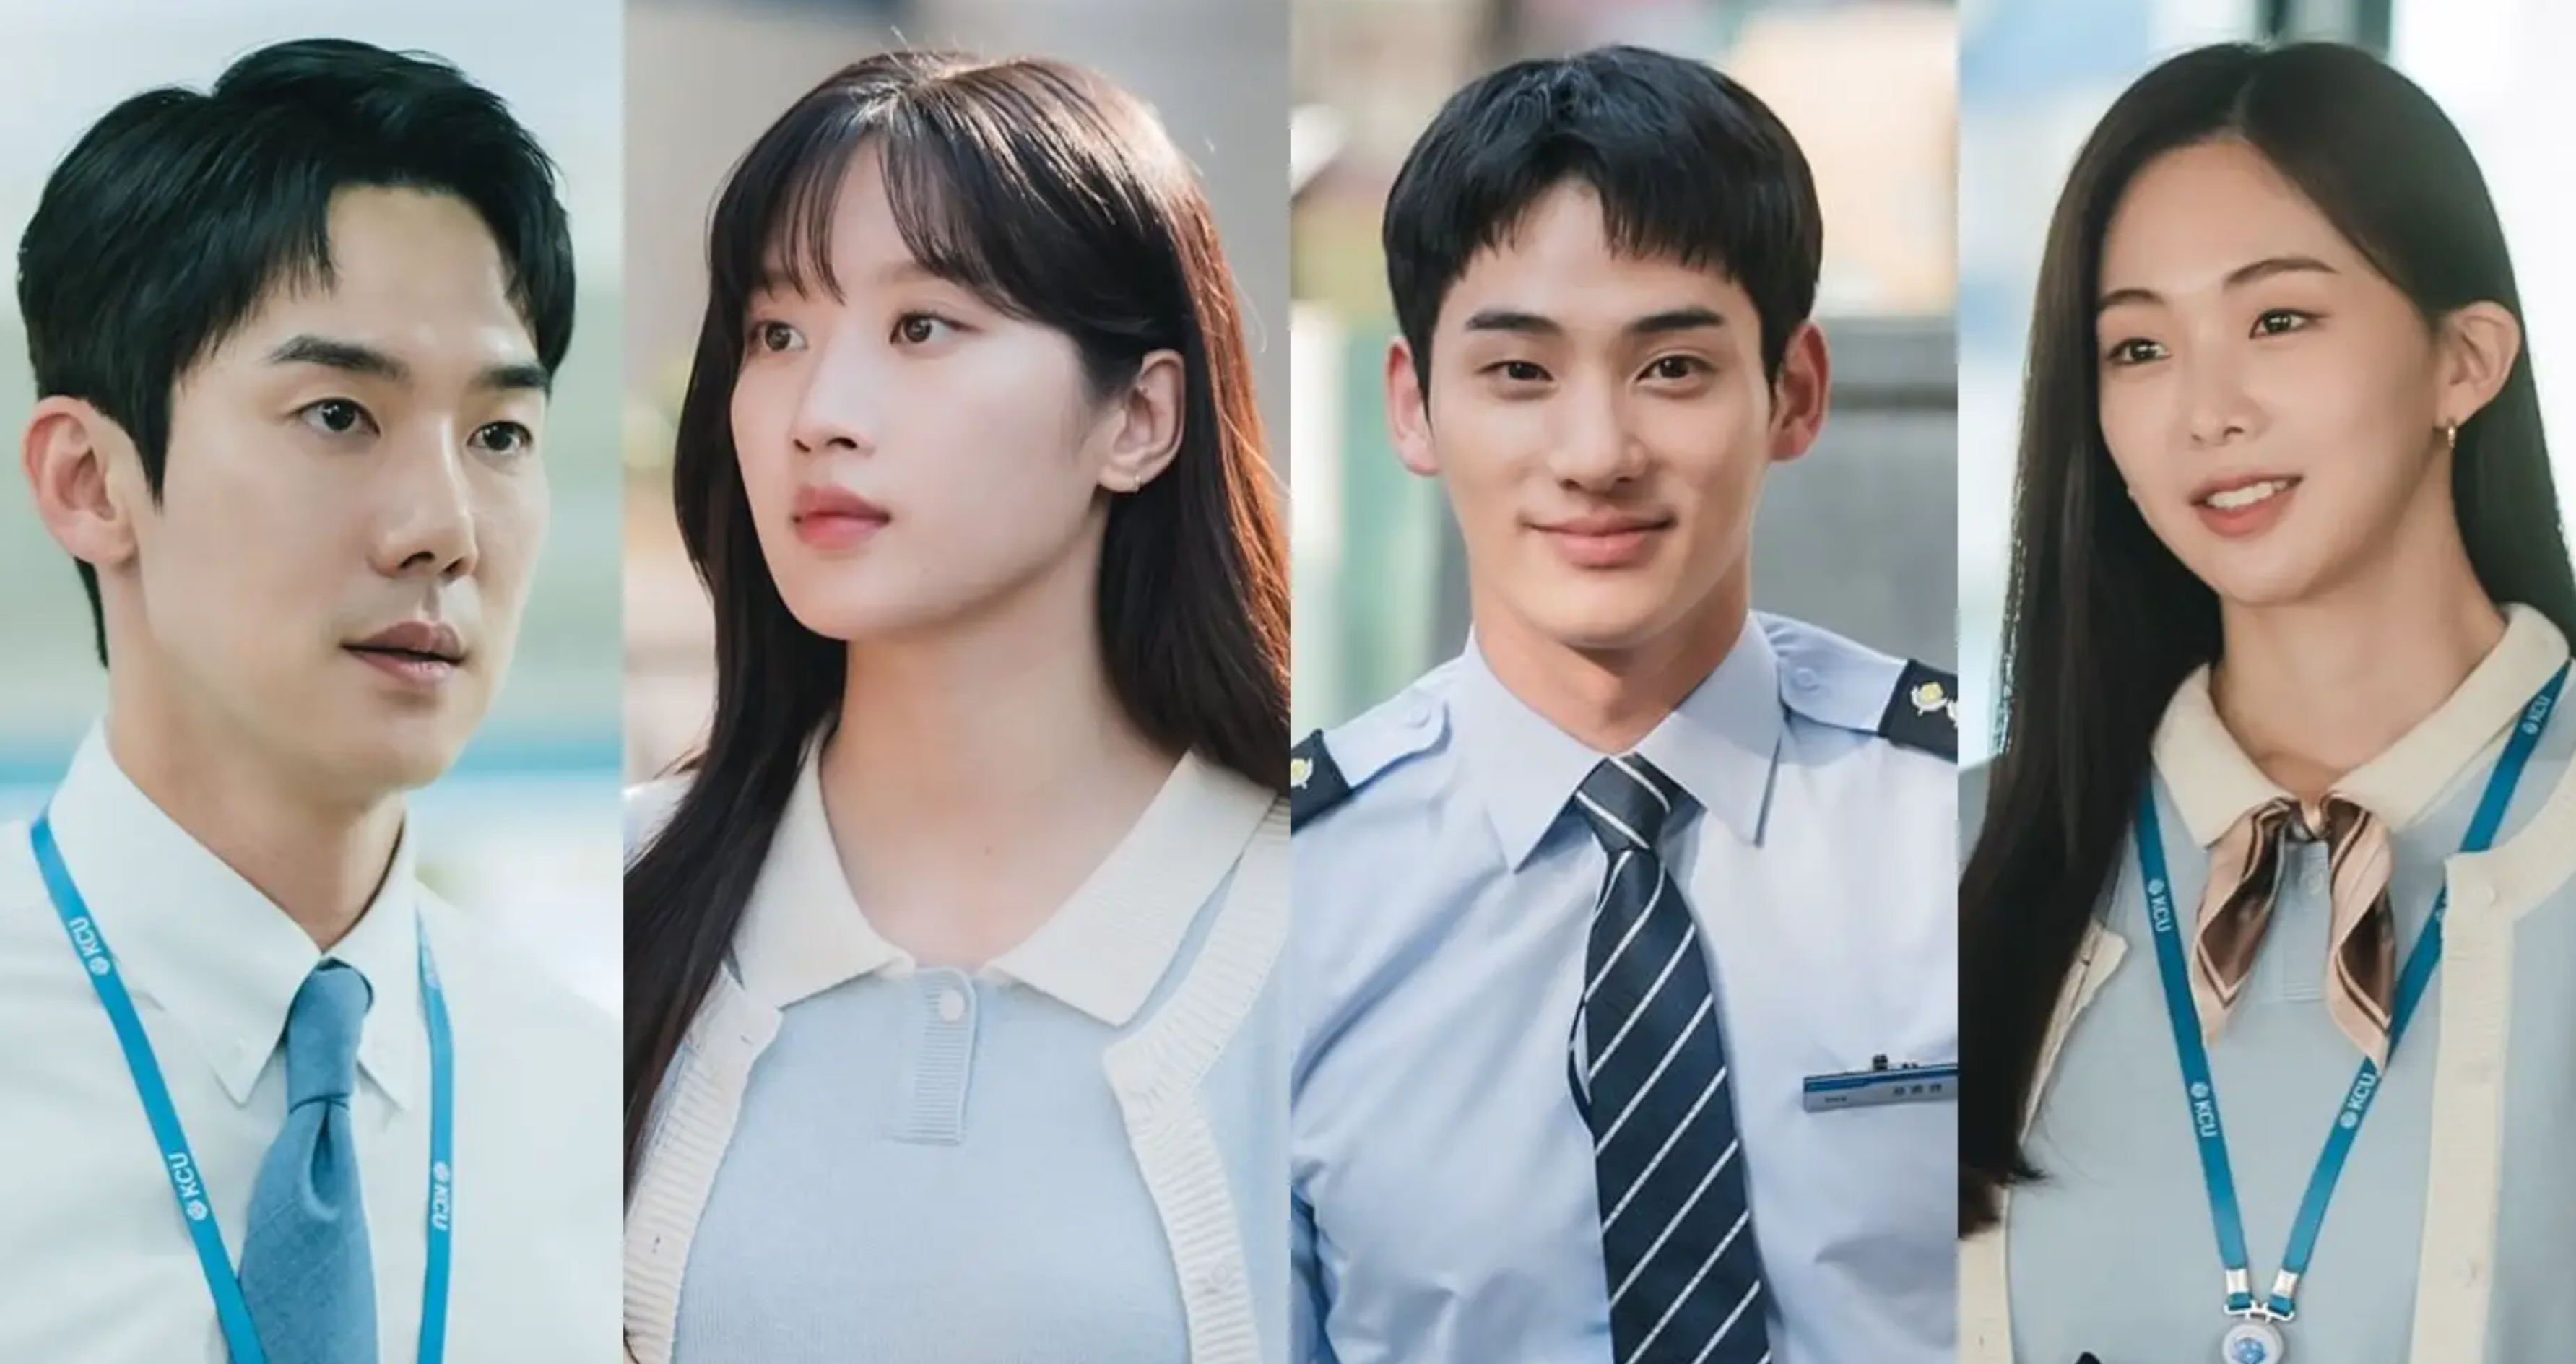 The Interest Of Love Season 2: Has Netflix Confirmed the Renewal of the Show?